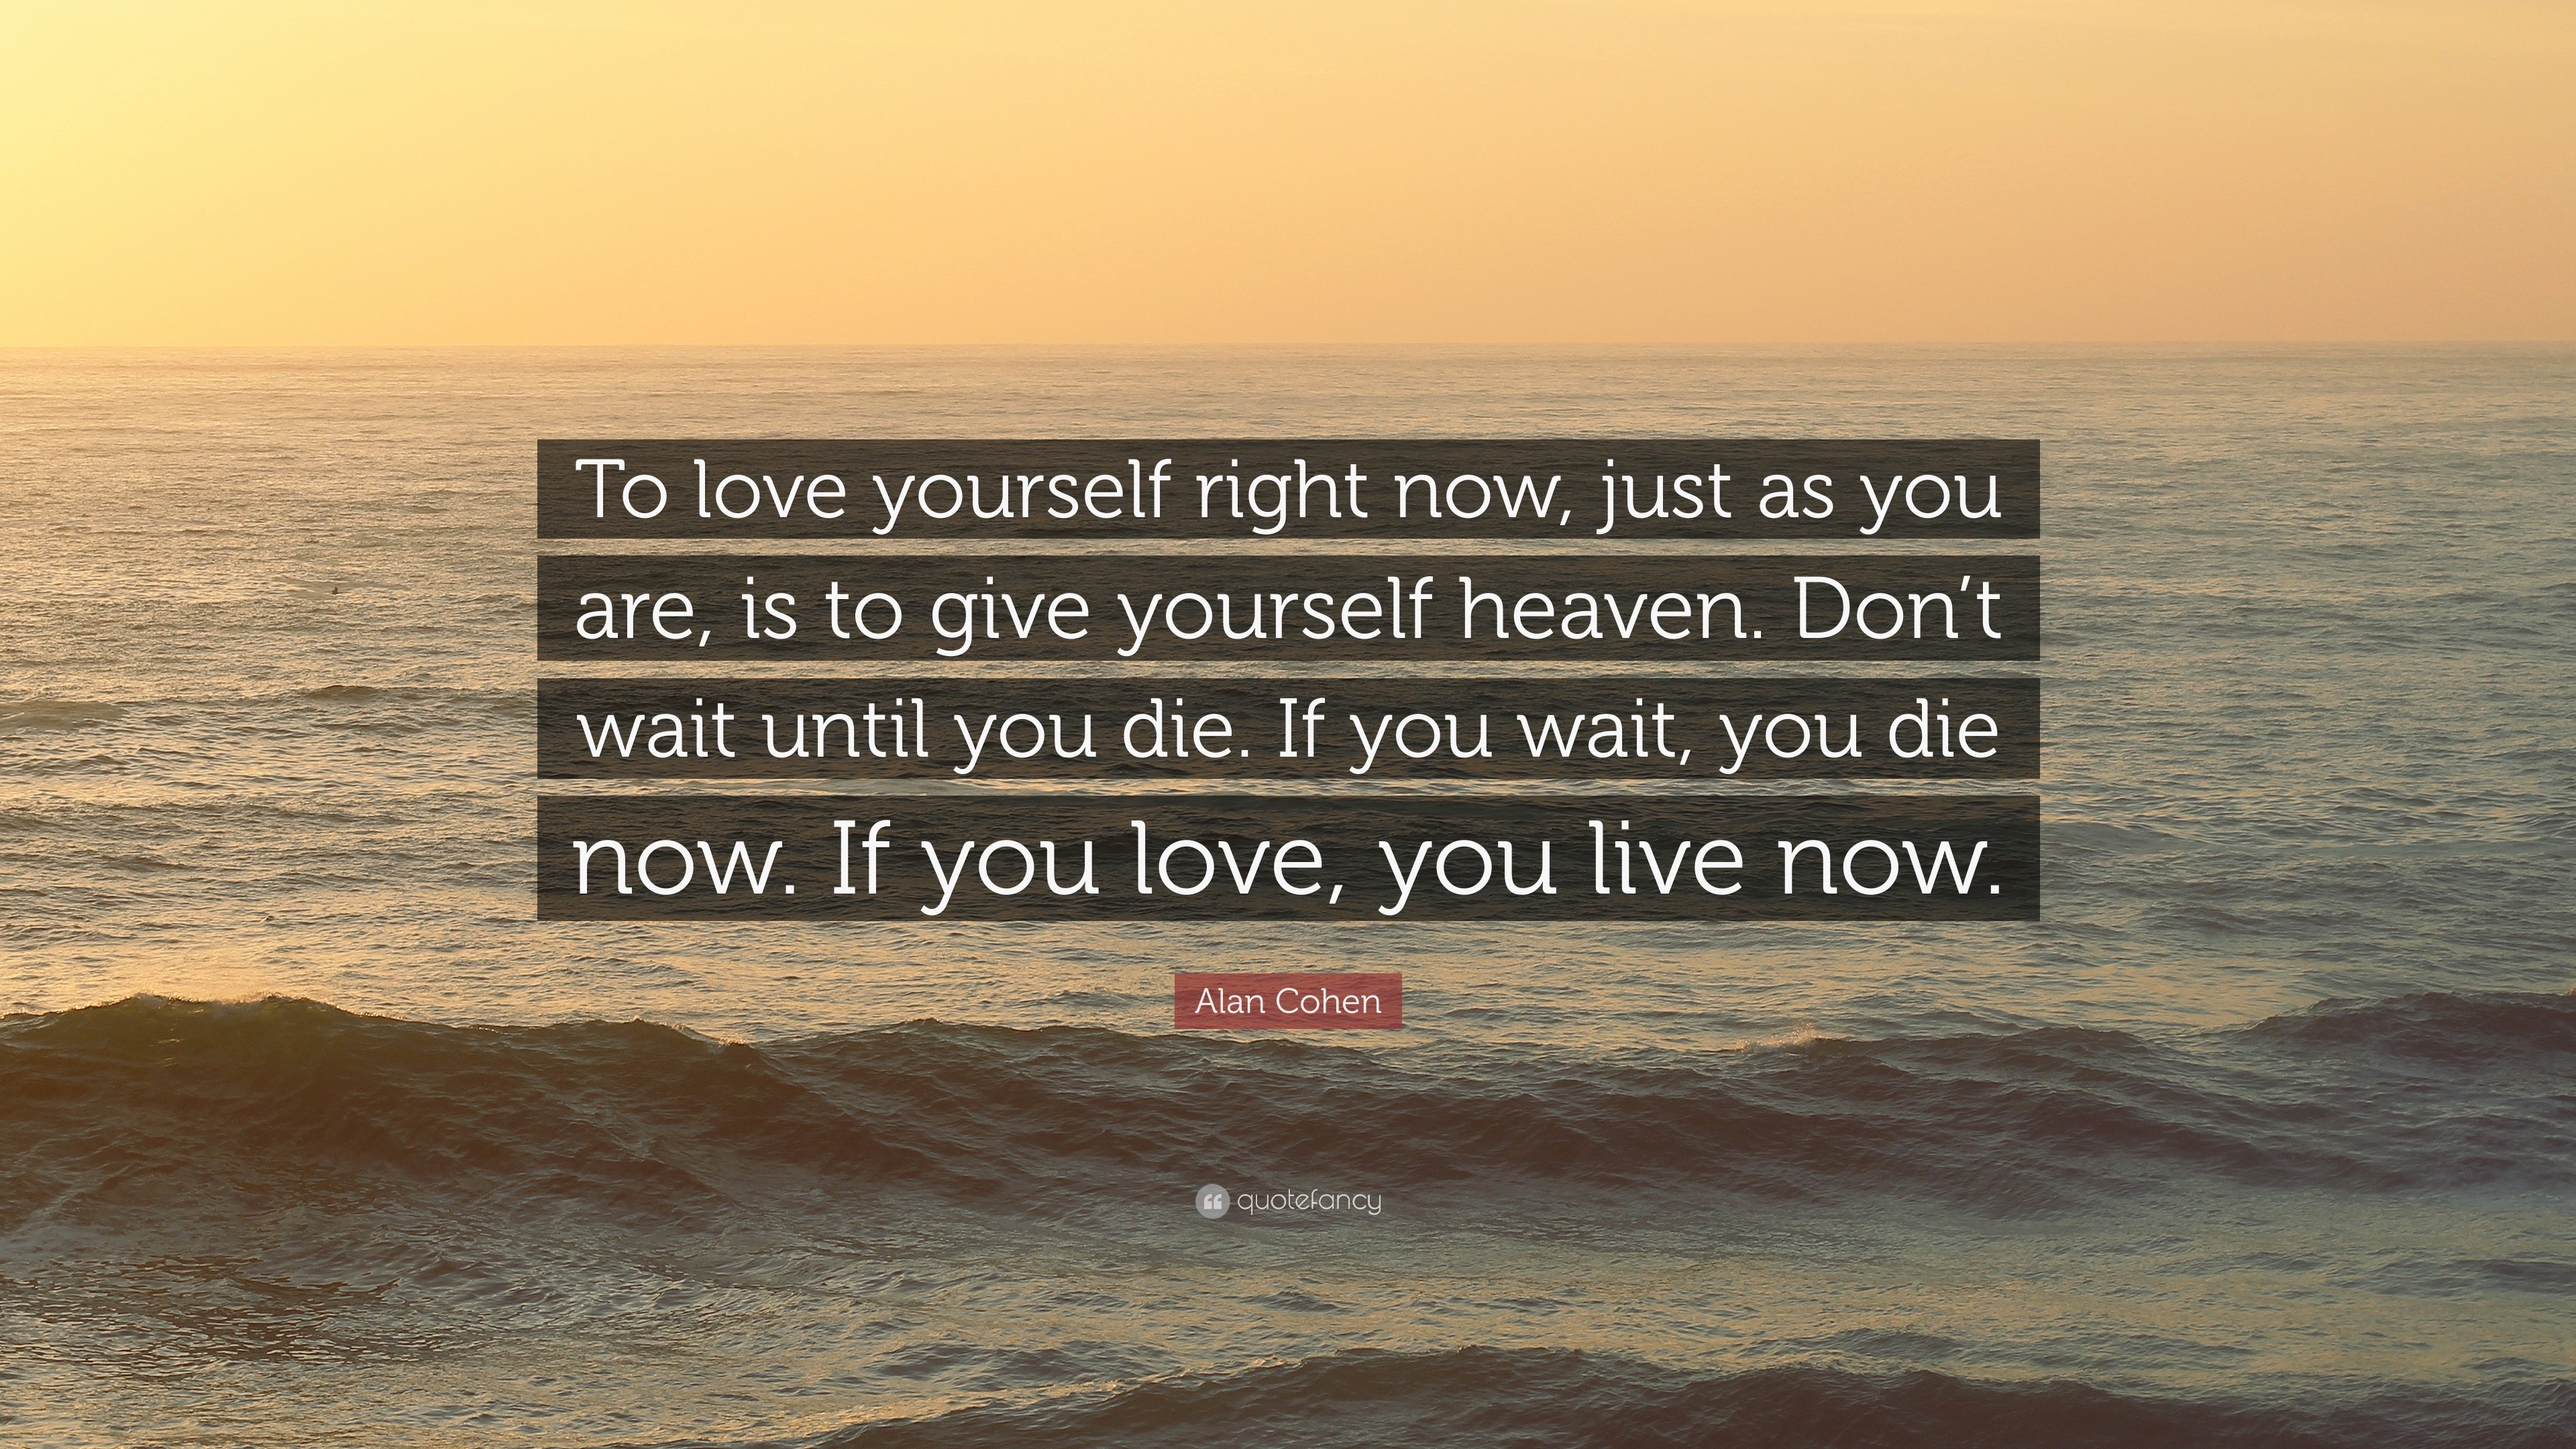 Alan Cohen Quote “To love yourself right now just as you are